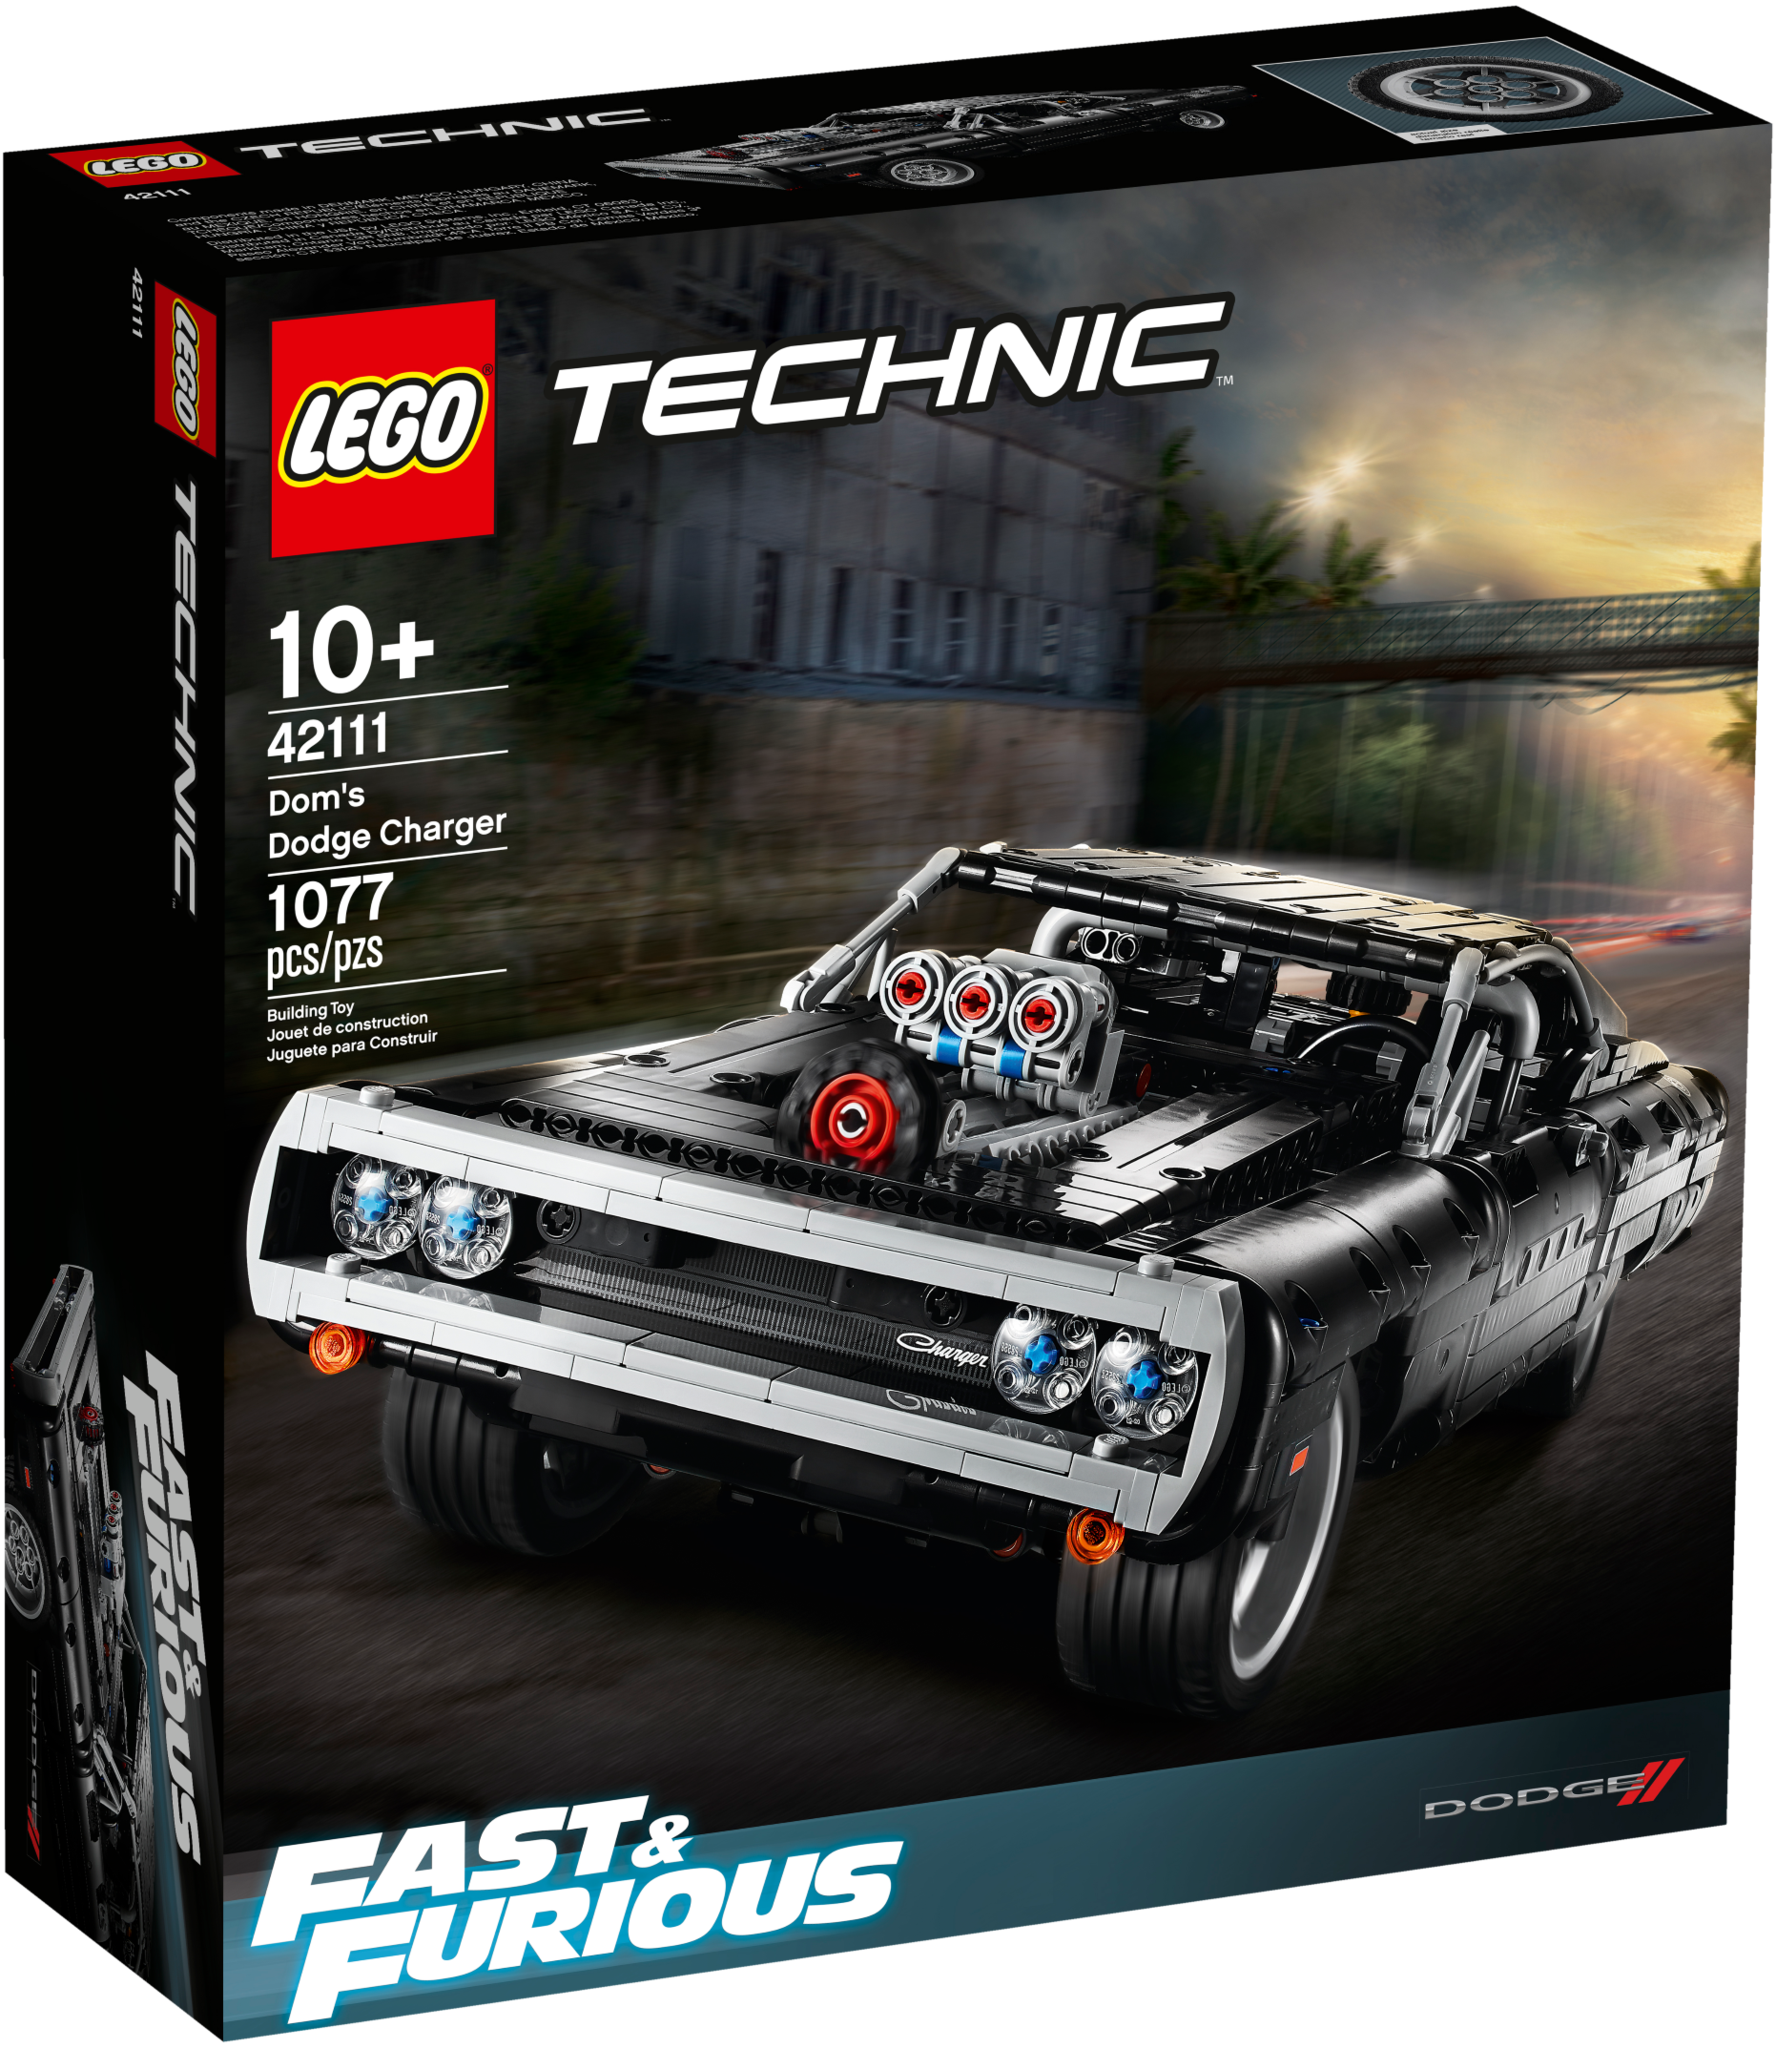 Bring Home the Fast & Furious Cars with New LEGO & Hot Wheels Sets